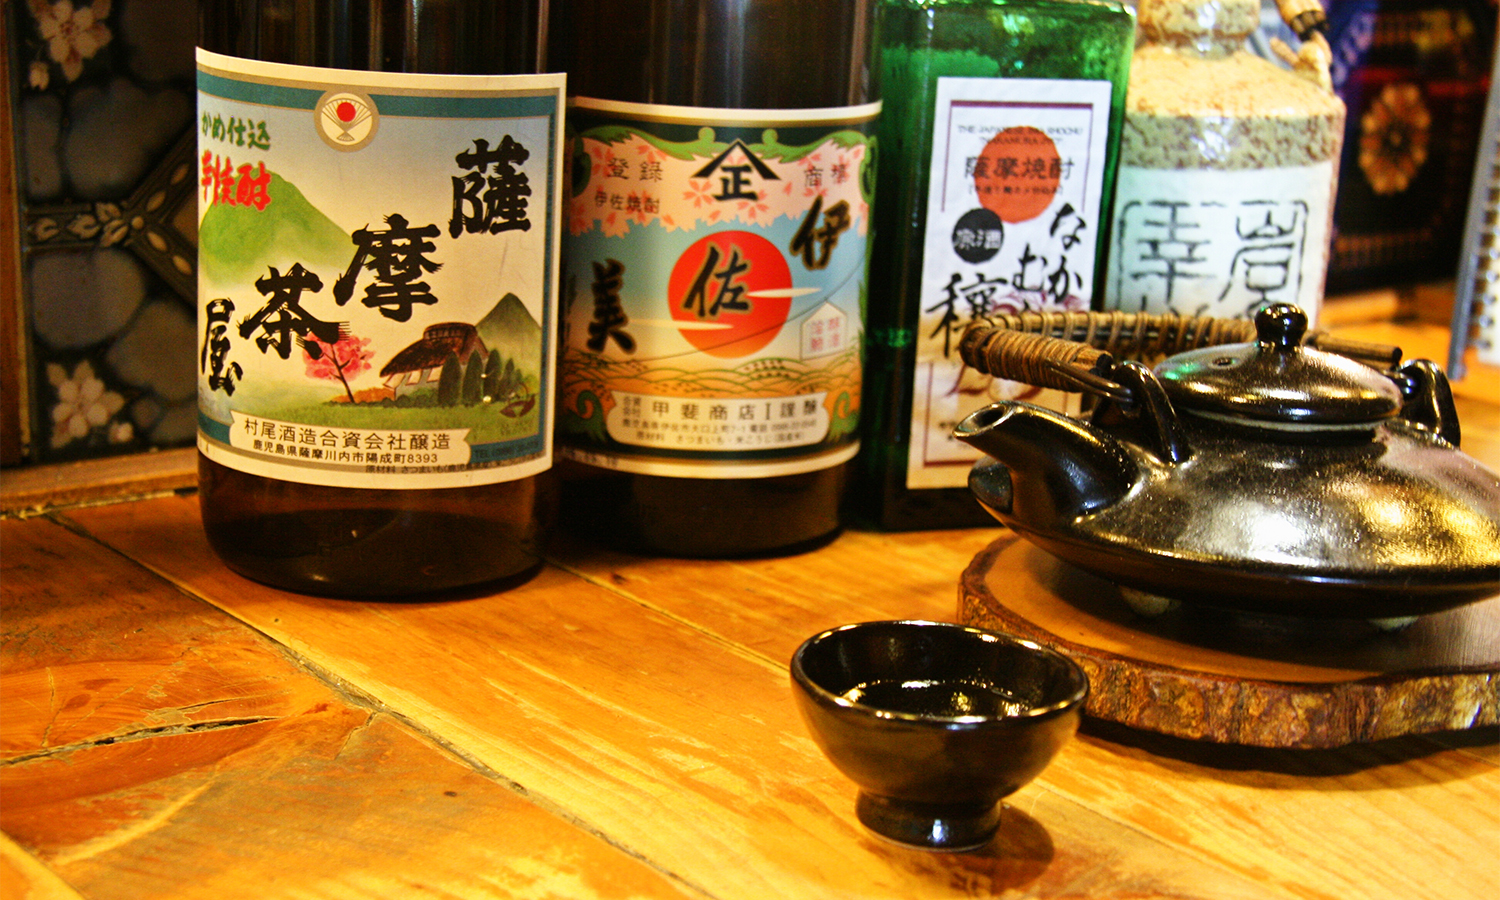 About 100 kinds of distilled spirit, mainly from Kyushu!